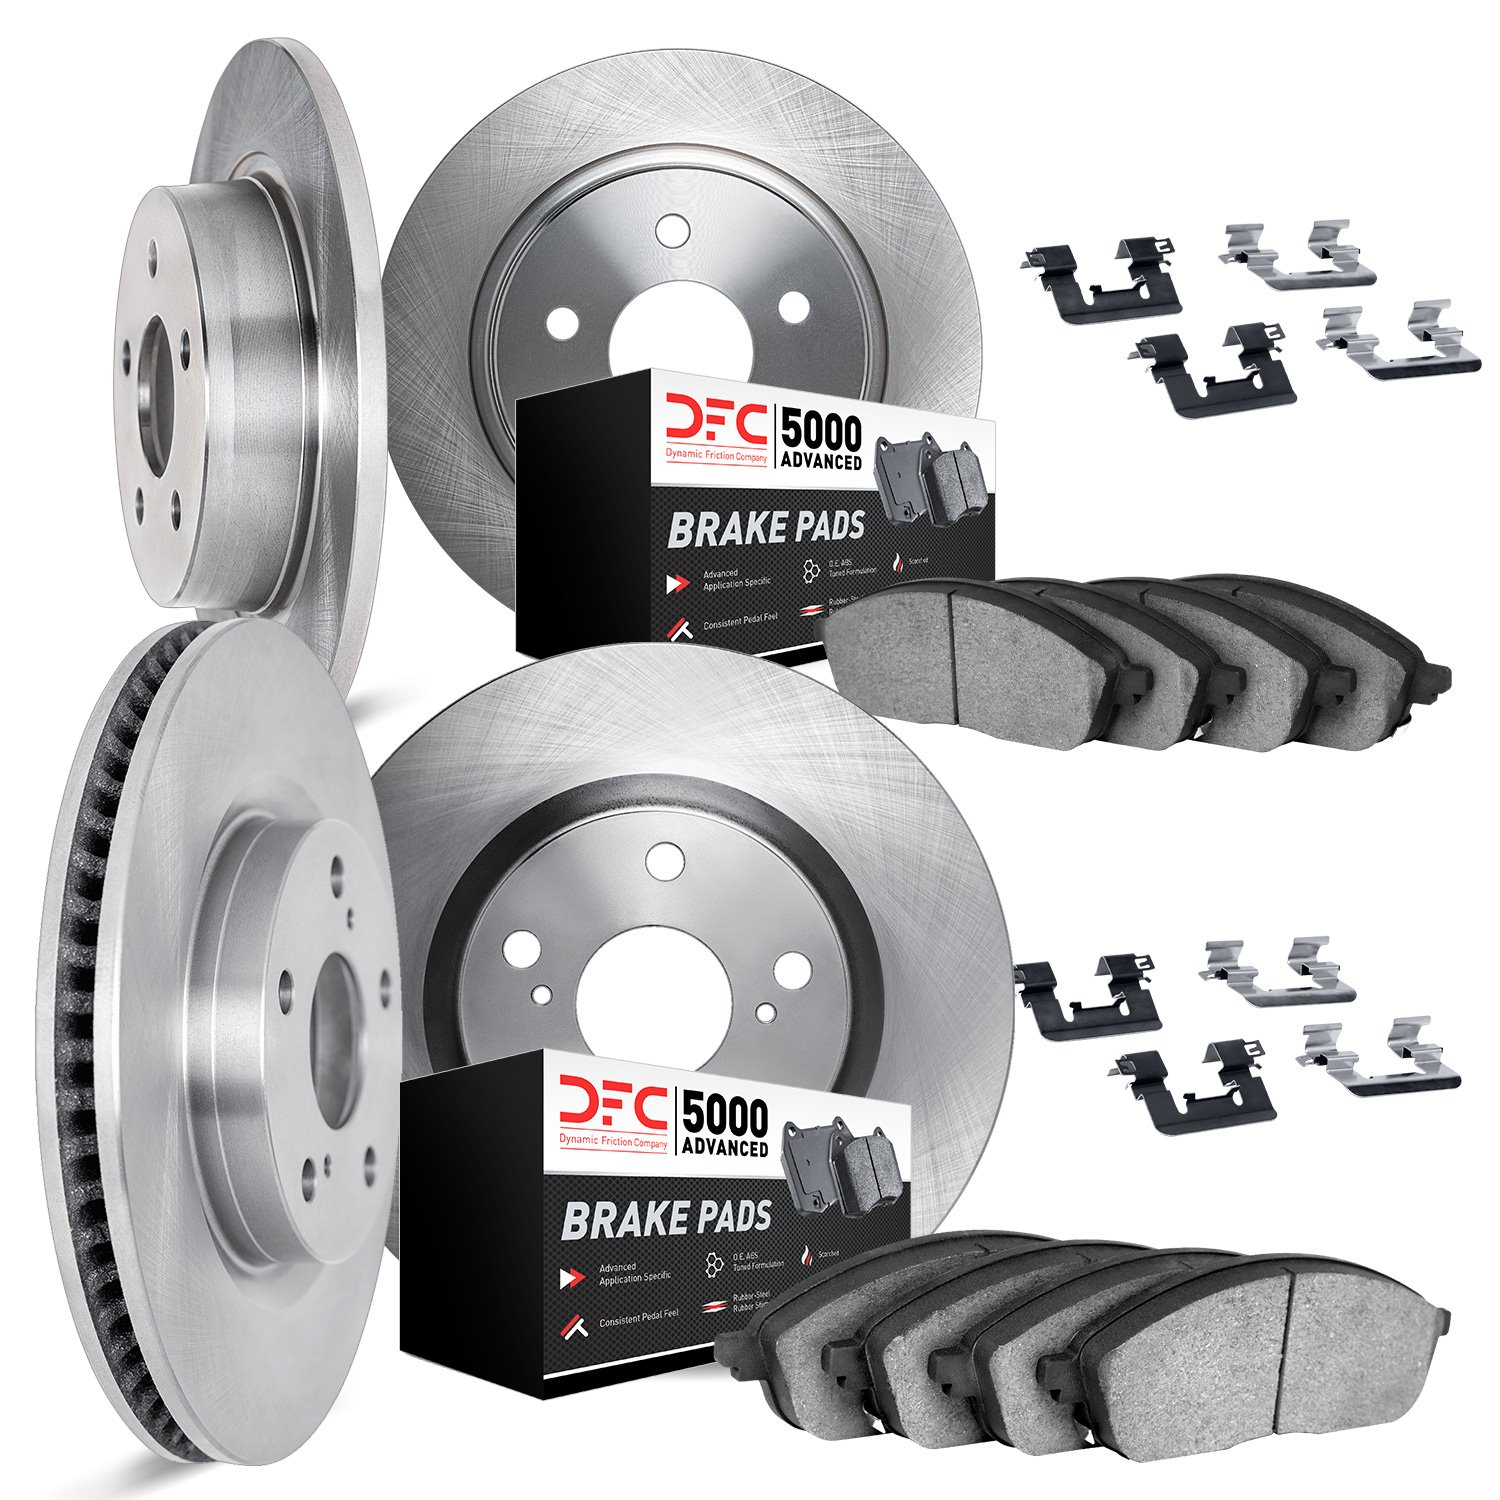 6514-01003 Brake Rotors w/5000 Advanced Brake Pads Kit with Hardware, 2007-2014 Suzuki, Position: Front and Rear